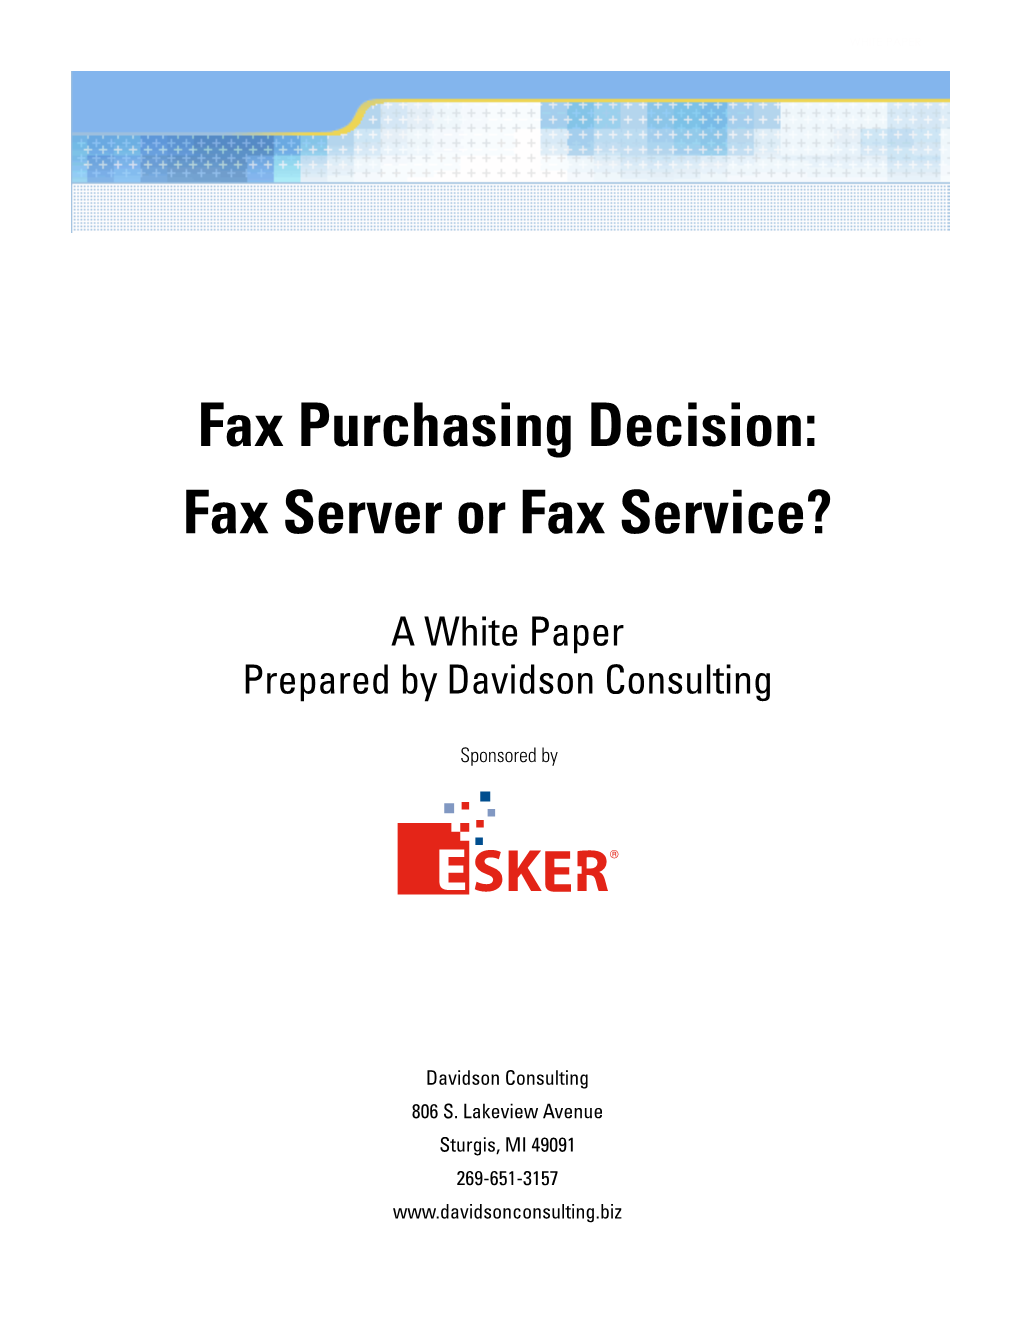 Fax Purchasing Decision: Fax Server Or Fax Service?